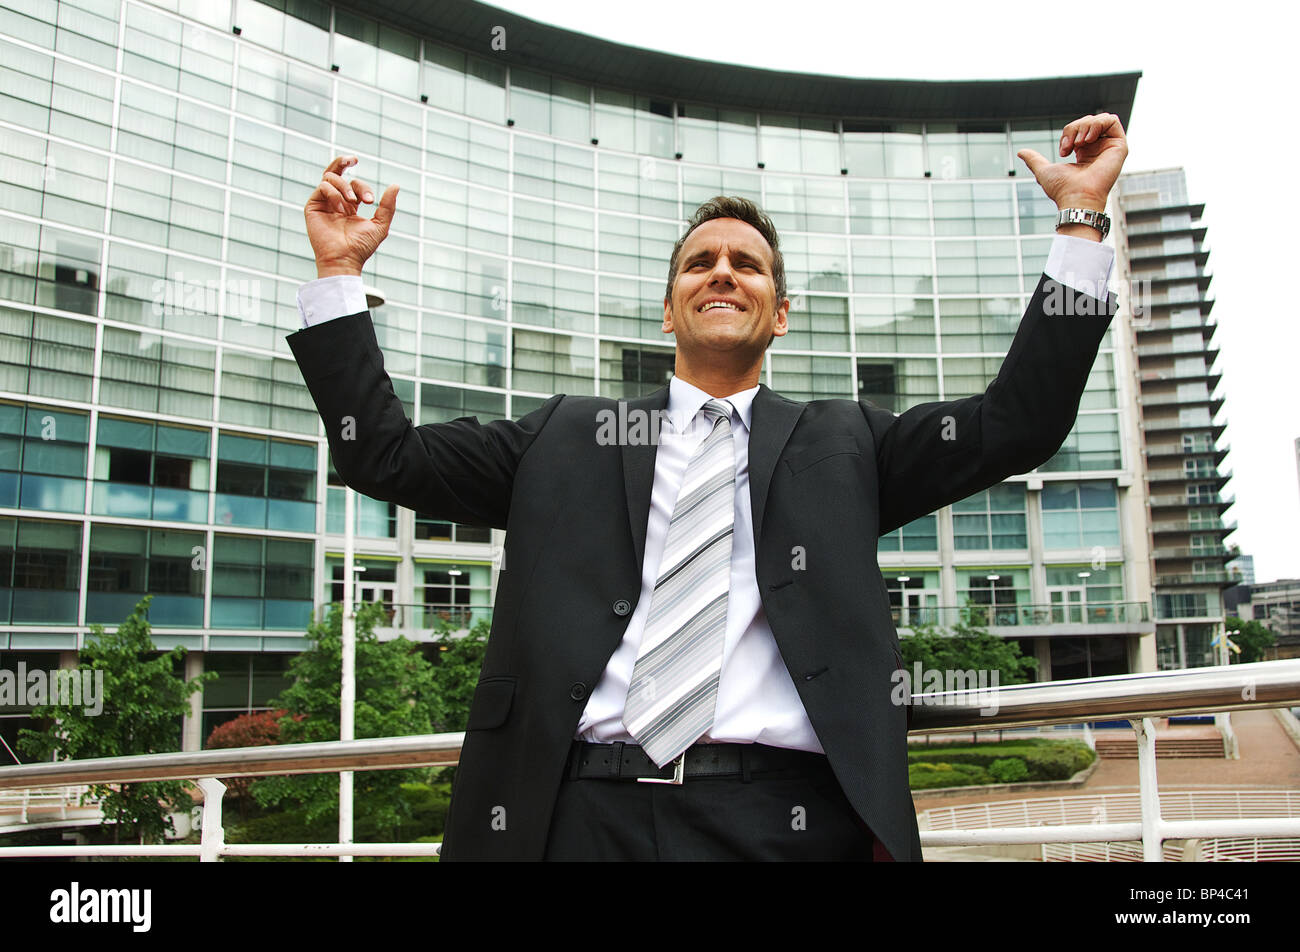 Business man with arms in air suggesting achievement and success Stock Photo